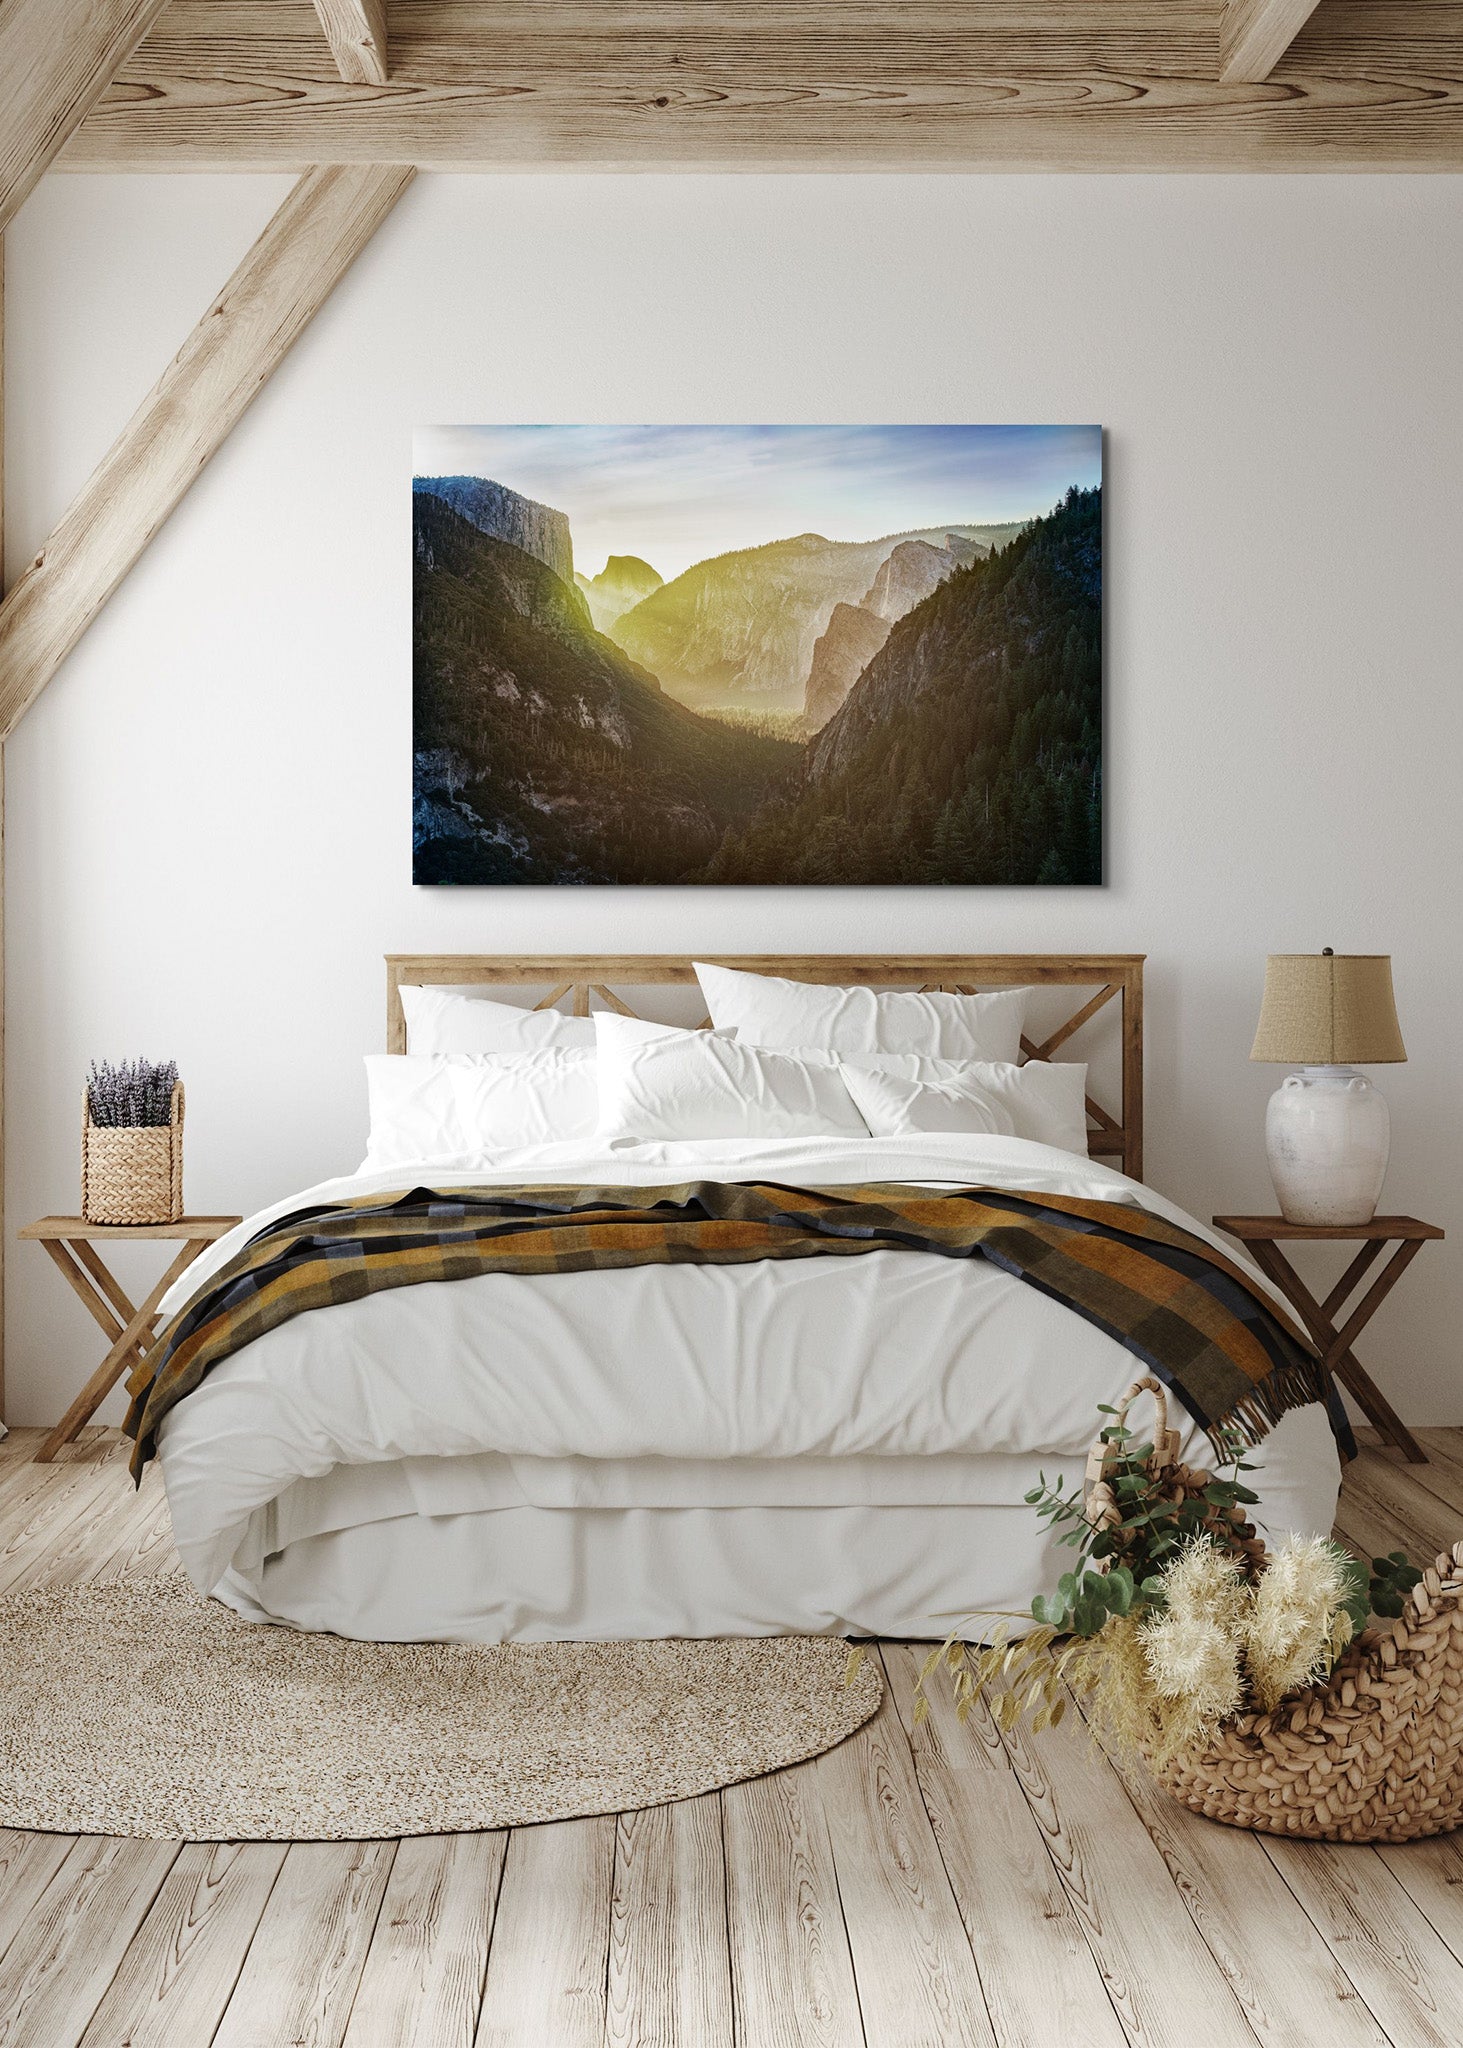 Picture hanging on the wall of a bedroom over the bed. The picture is a fine art landscape photograph titled "The Valley Awakens" by Cameron Dreaux of Dreaux Fine Art.